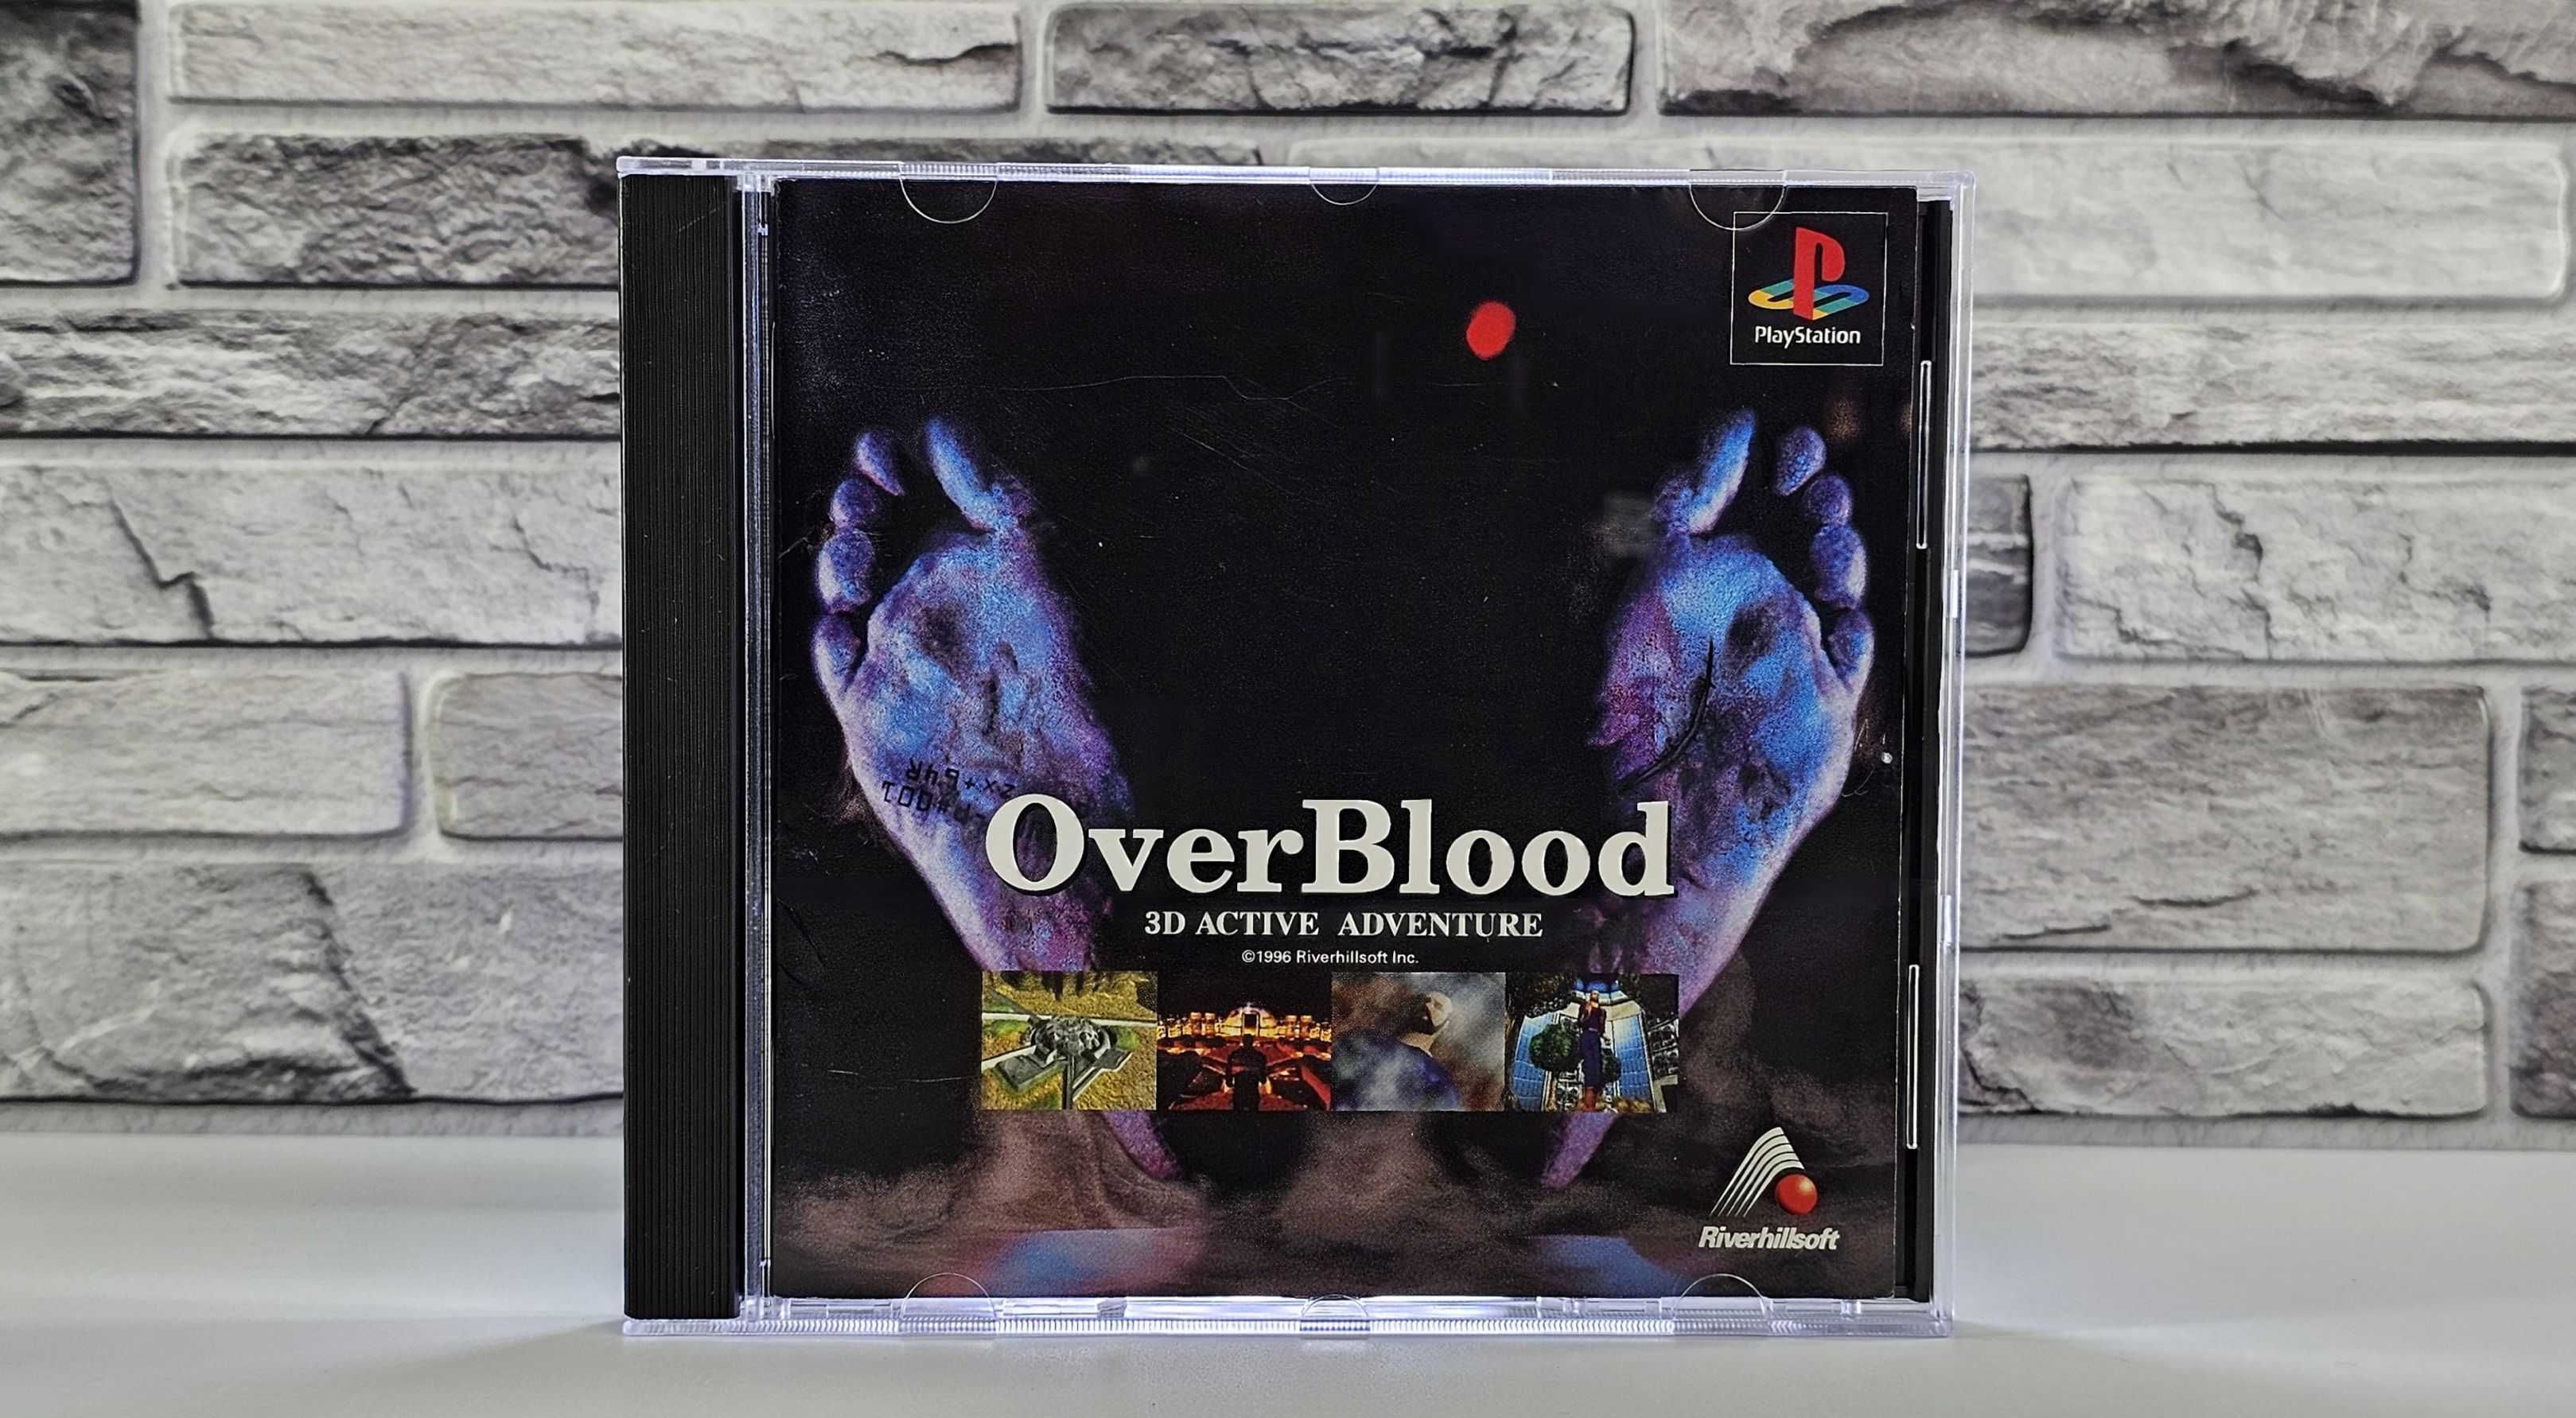 Playstation Overblood - A 3D Active Adventure